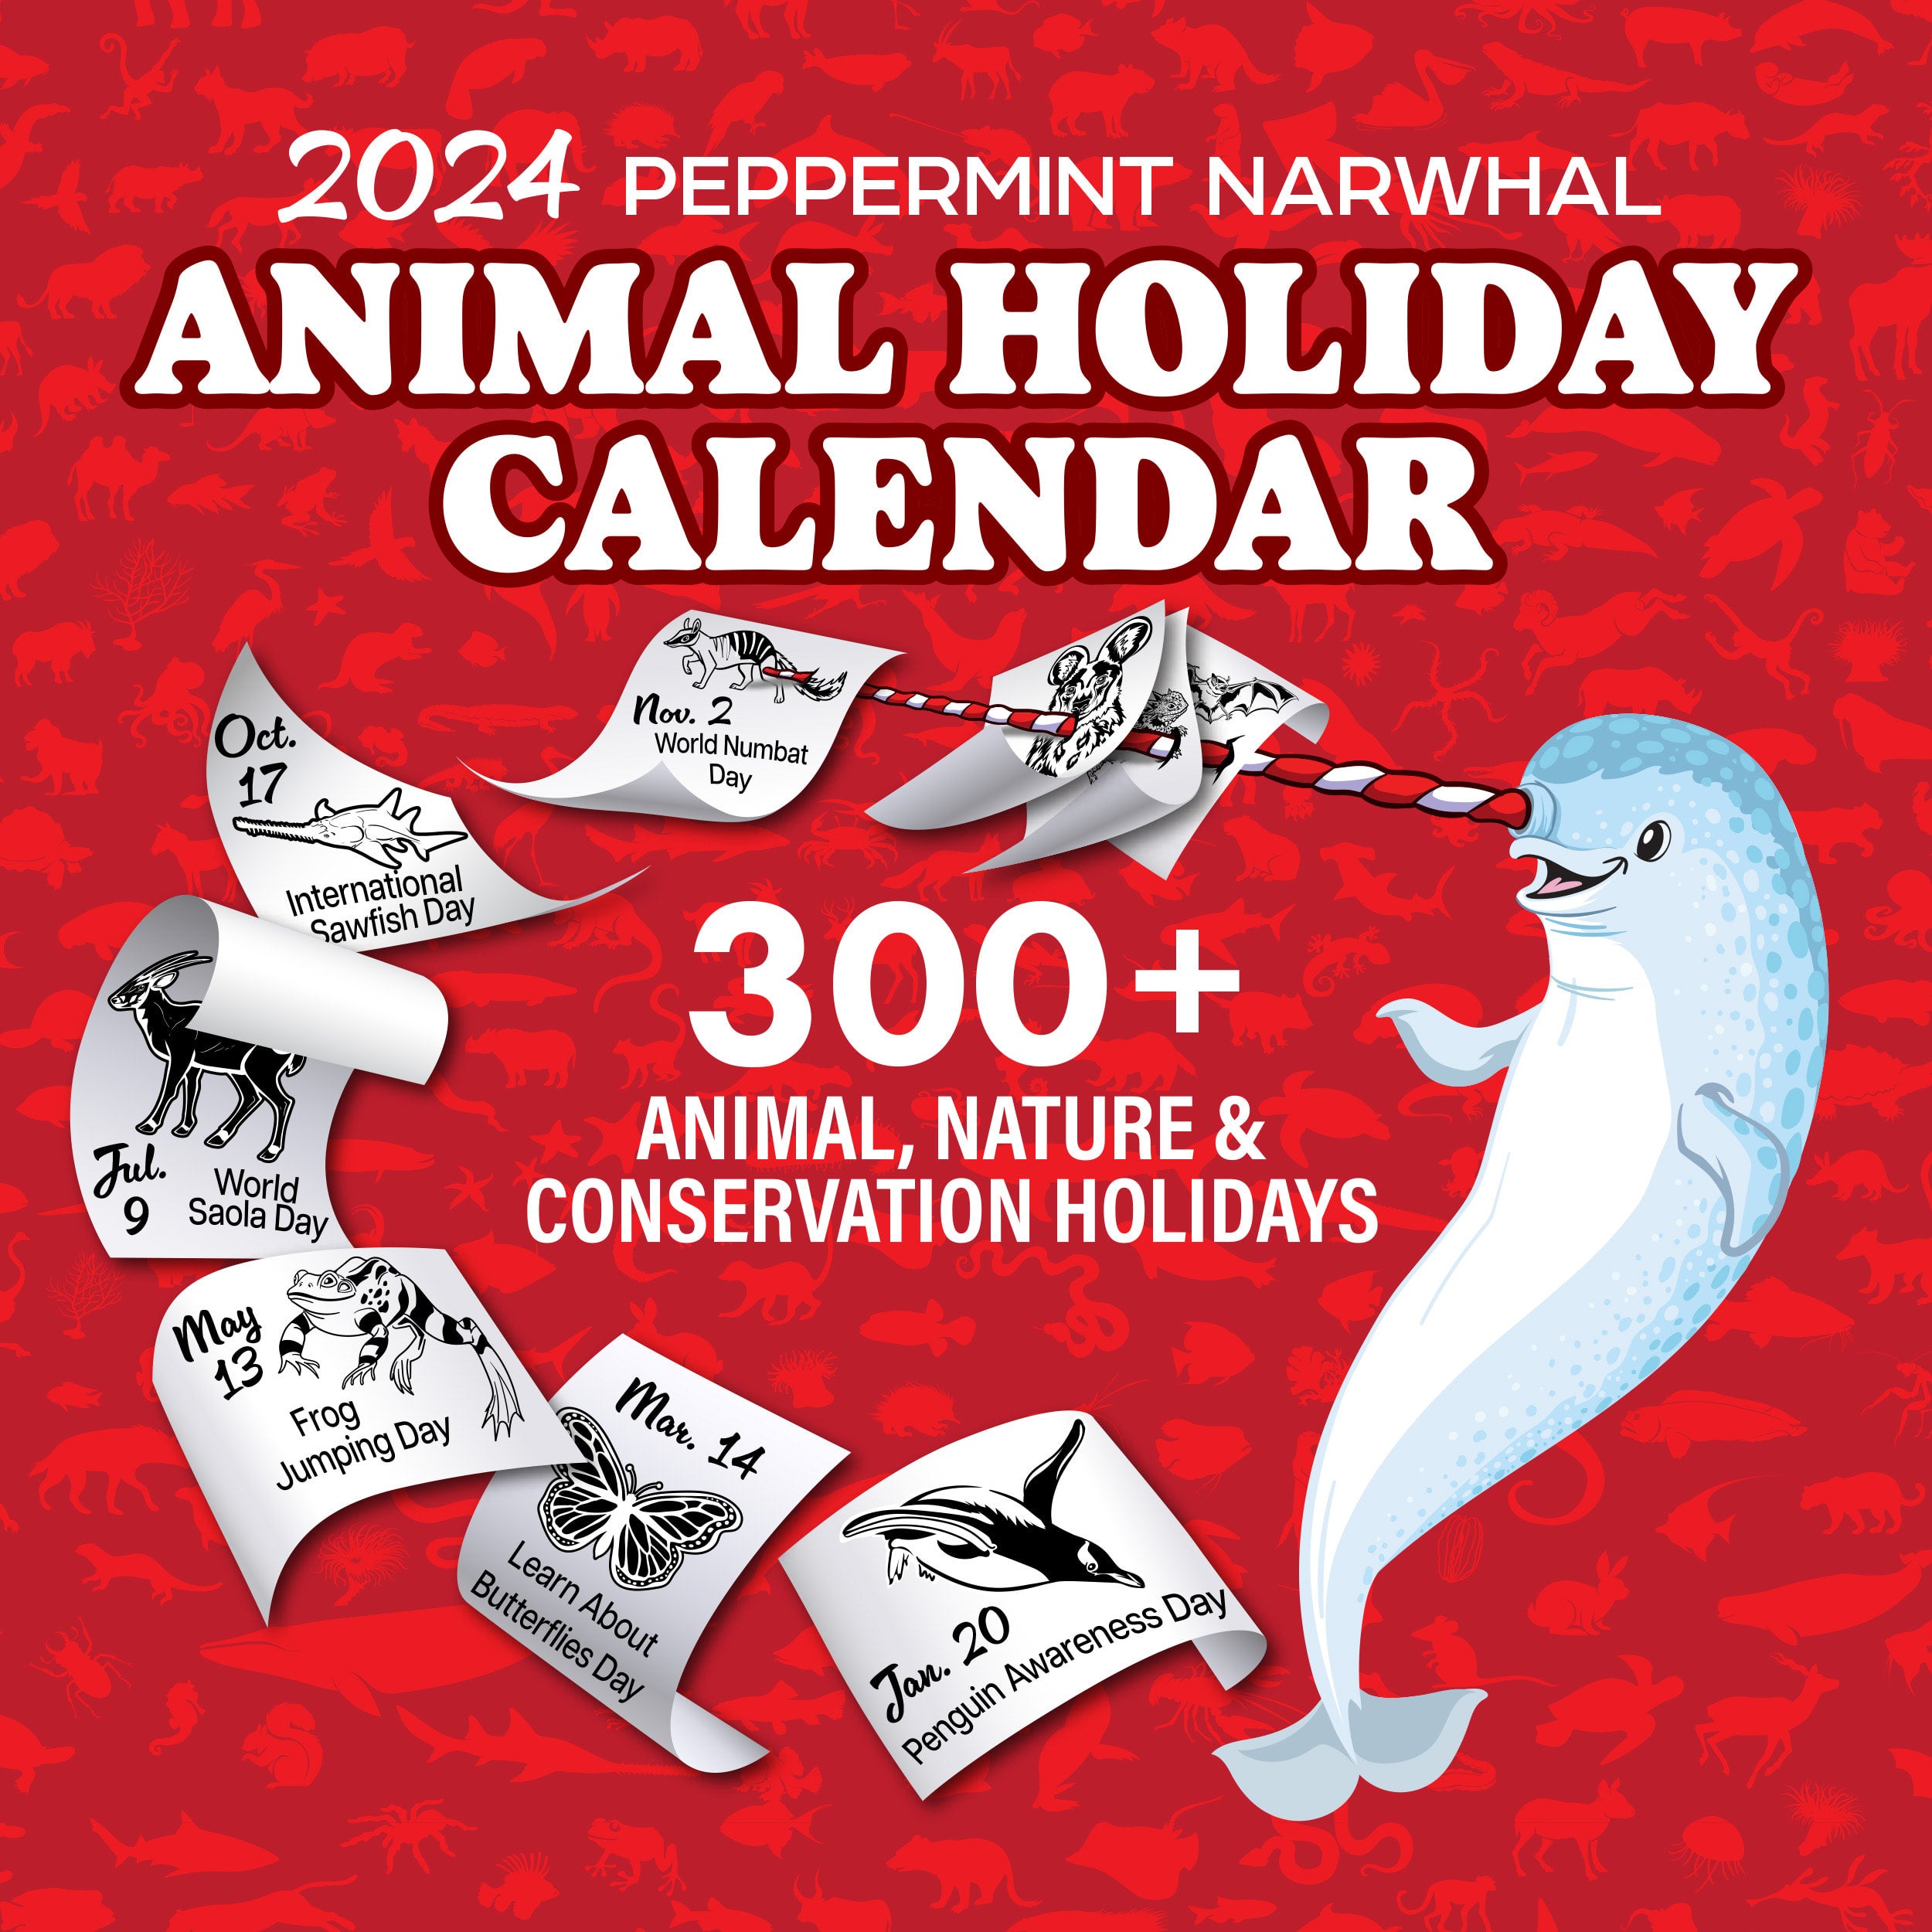 2024 Animal Holiday Calendar Peppermint Narwhal Conservation